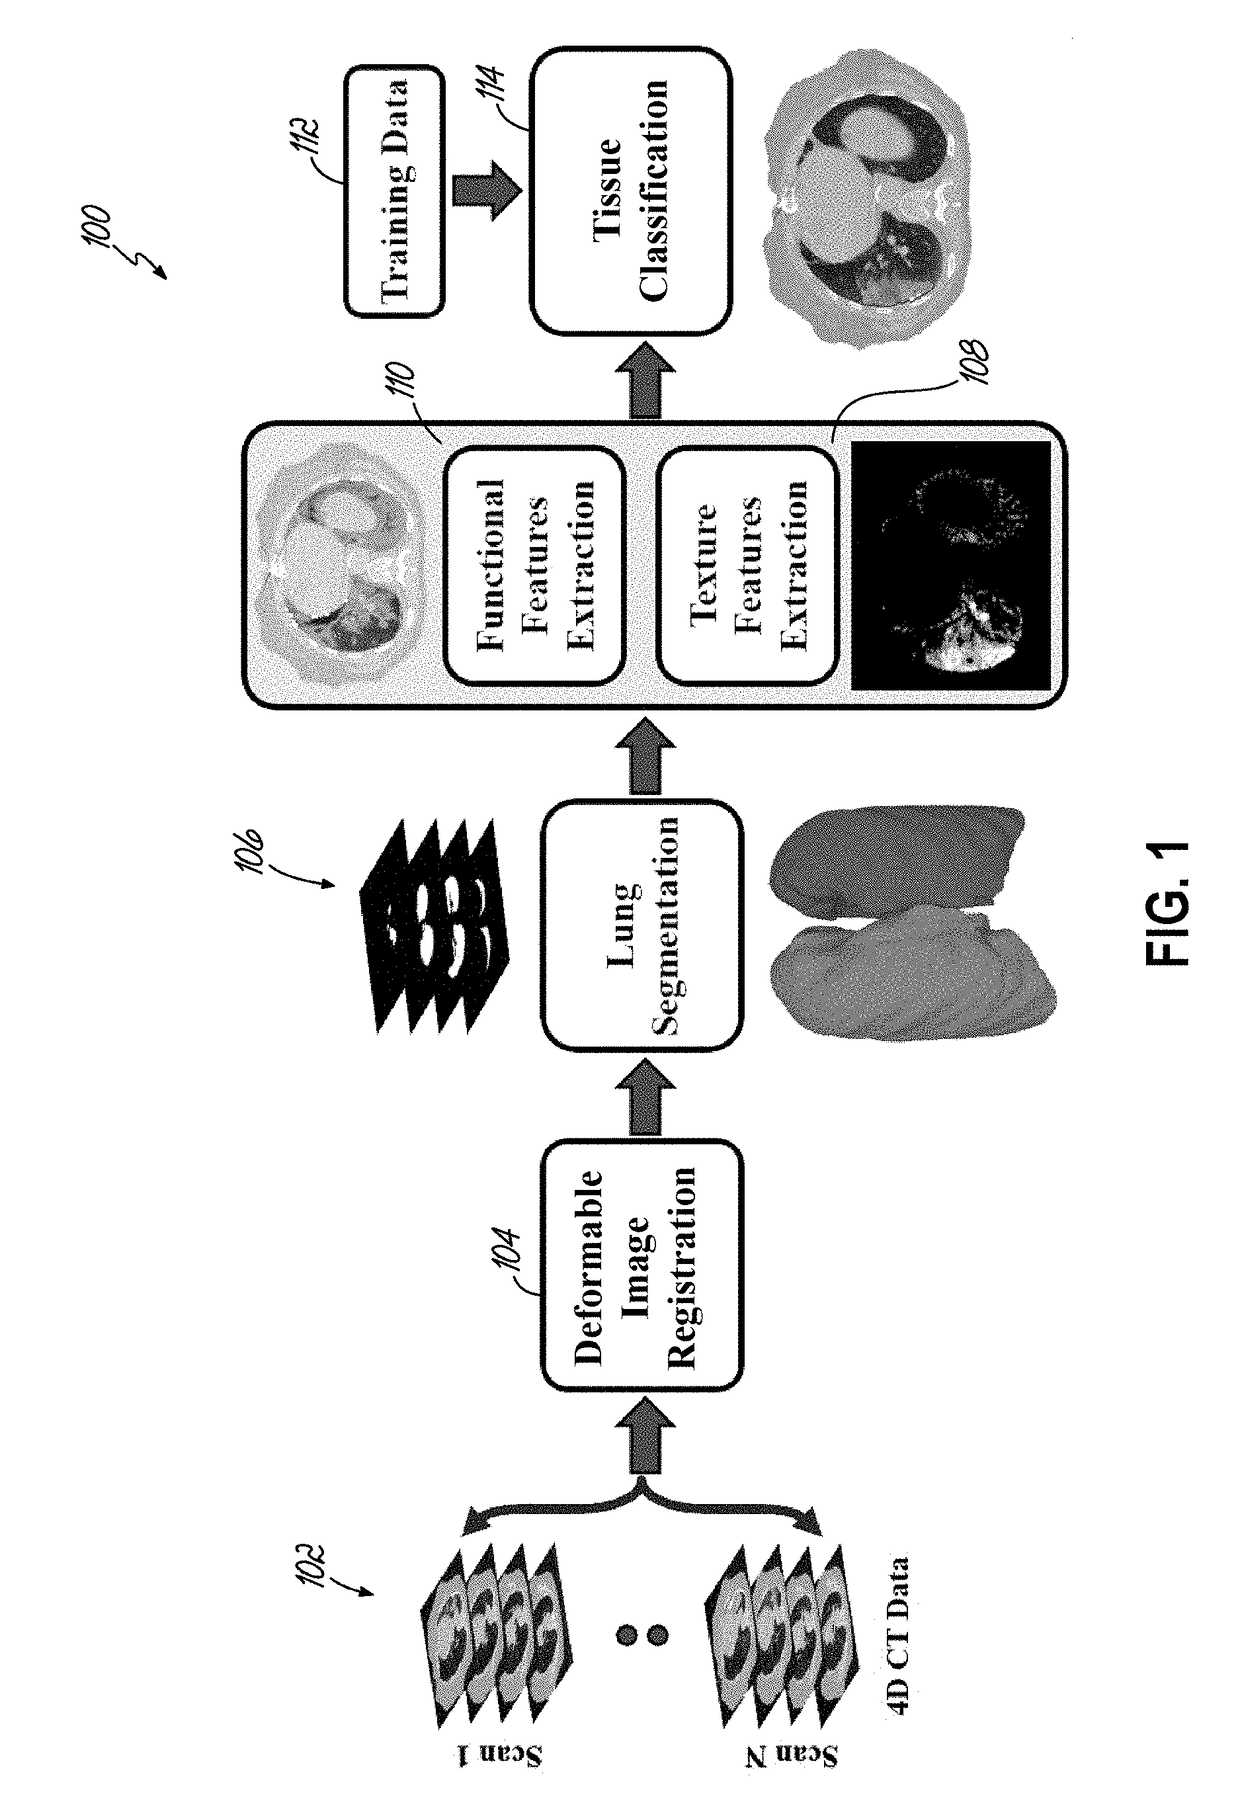 Accurate detection and assessment of radiation induced lung injury based on a computational model and computed tomography imaging